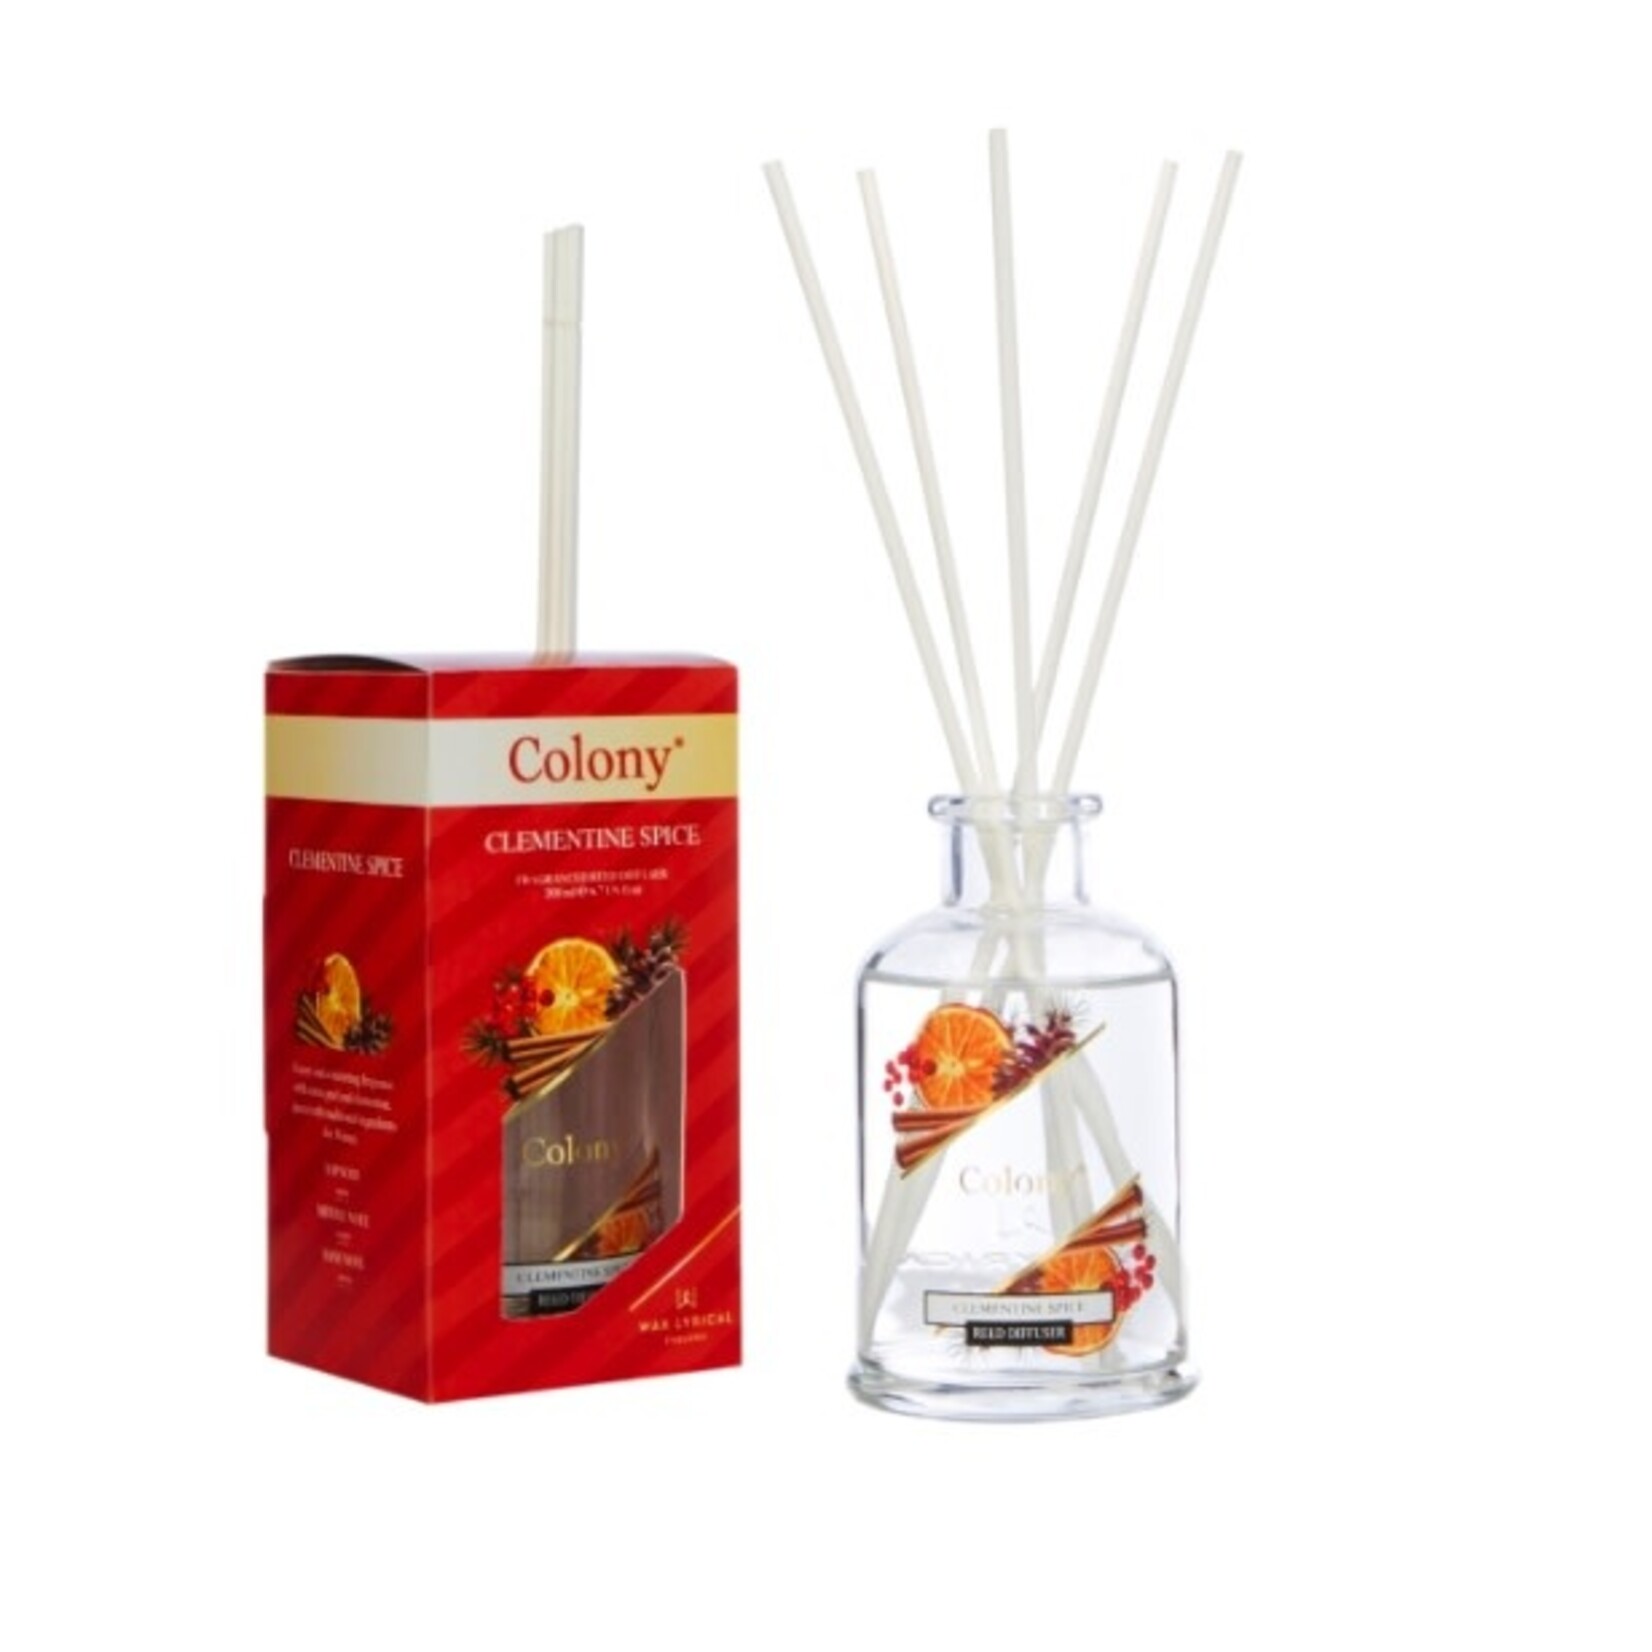 Wax Lyrical Colony Clementine Spice Reed Diffuser 200 ml